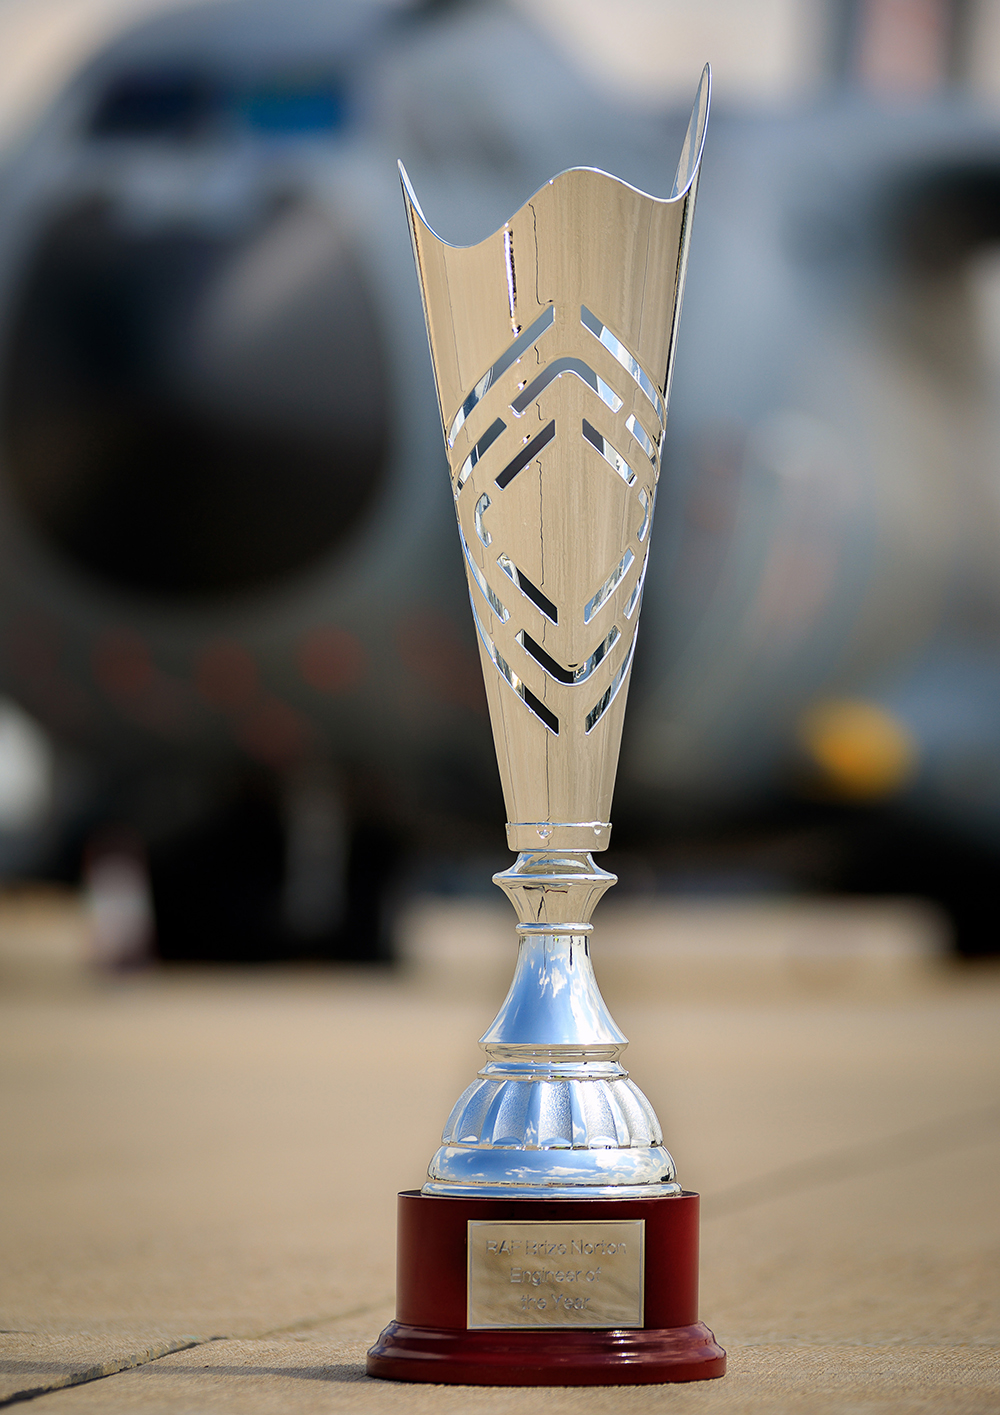 The RAF Brize Norton Engineer of the Year Award